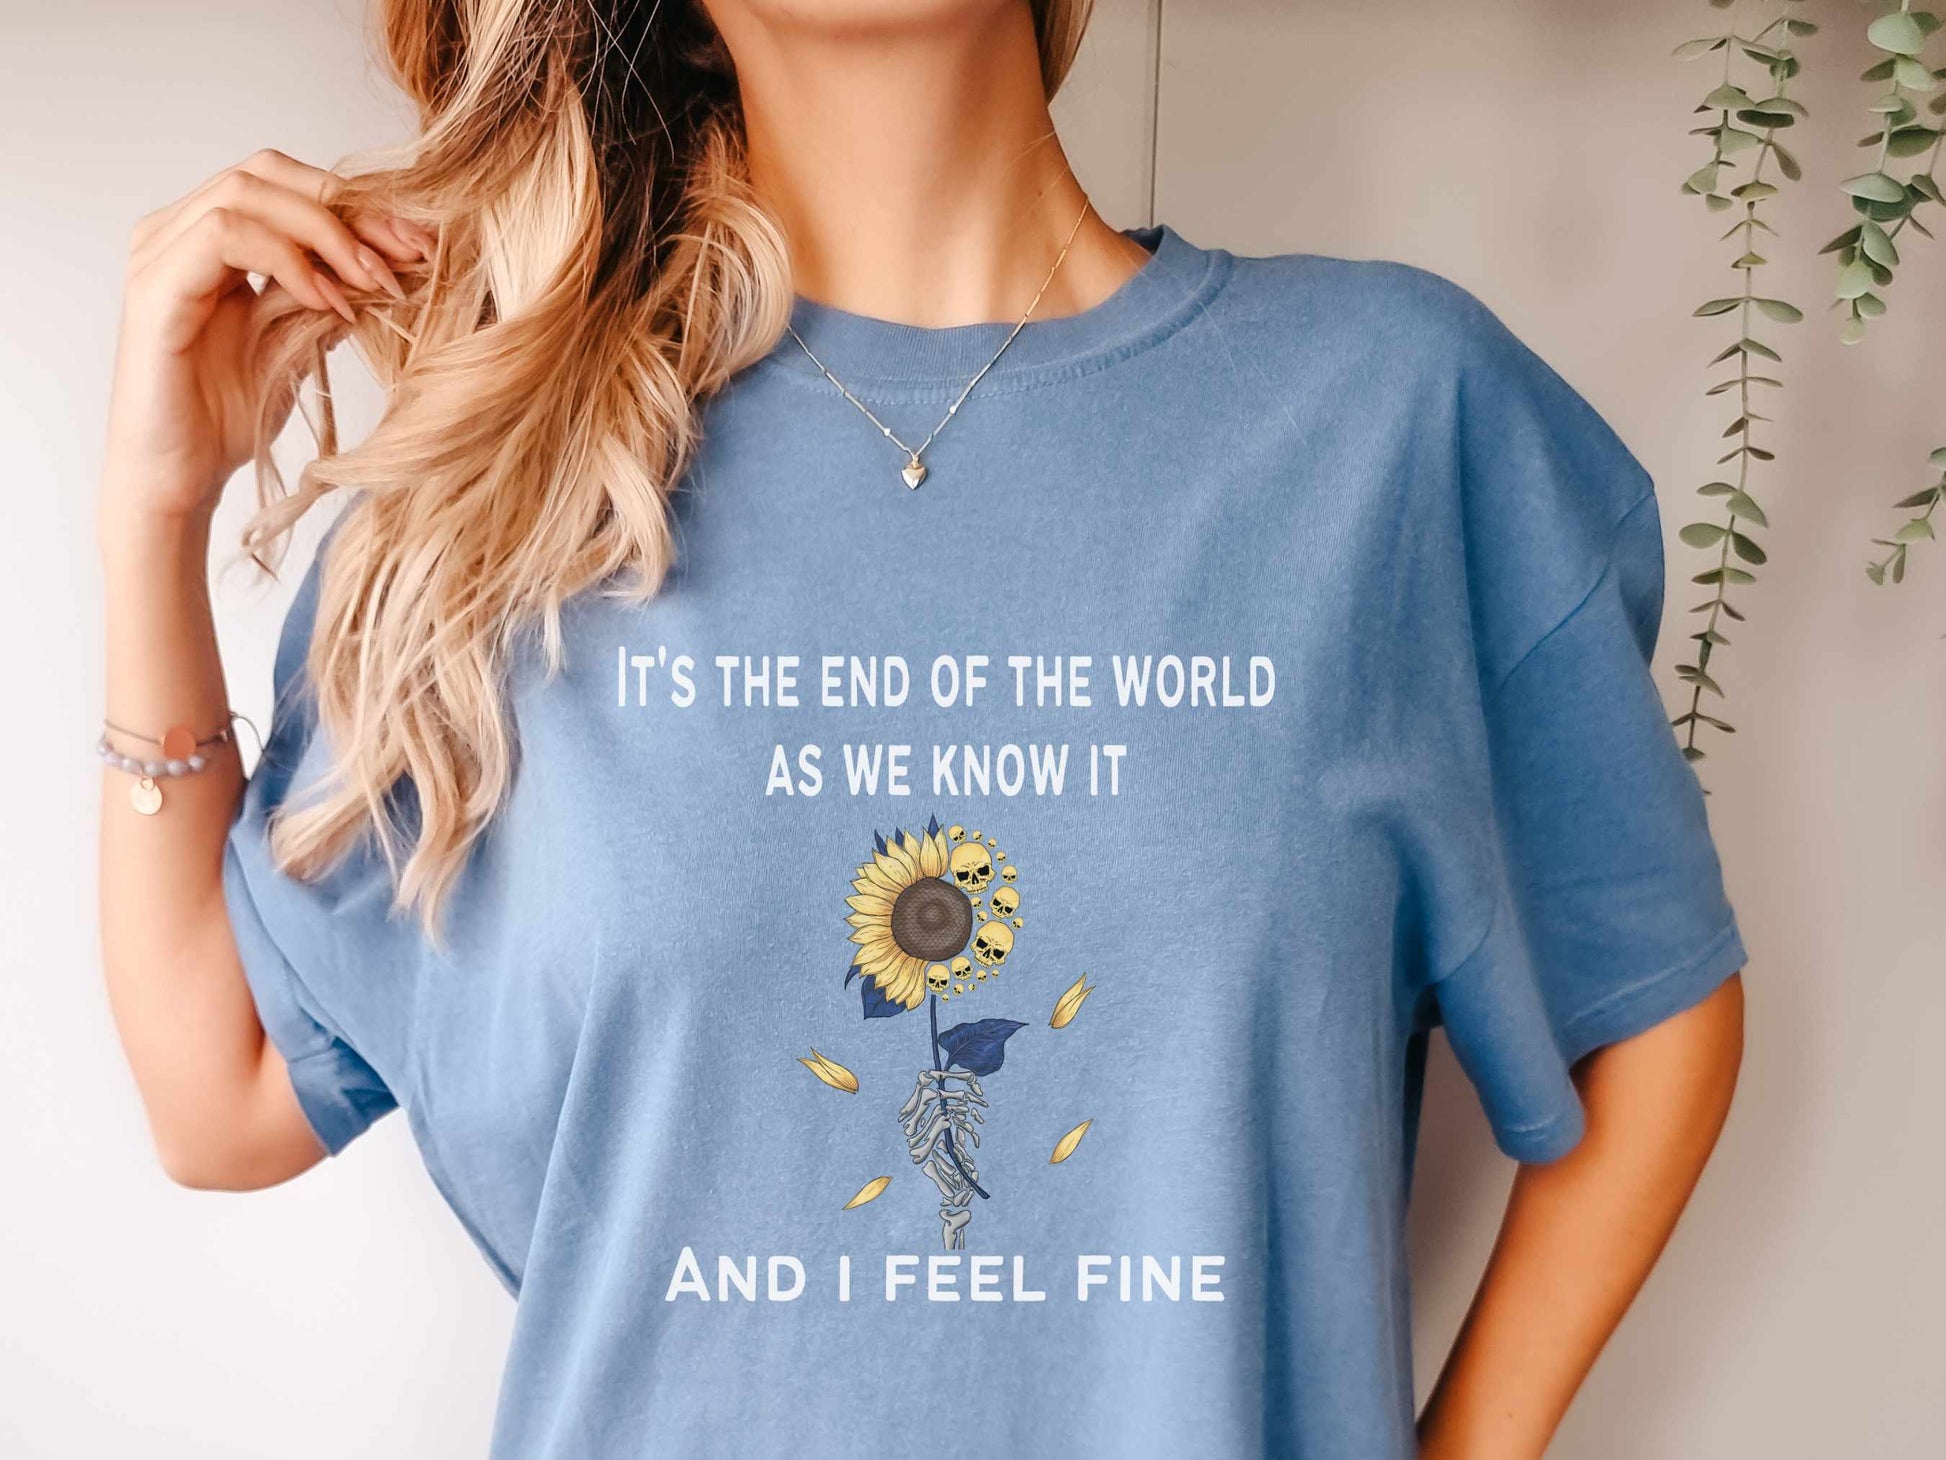 R.E.M."End of World" Graphic T-Shirt in Blue Jean